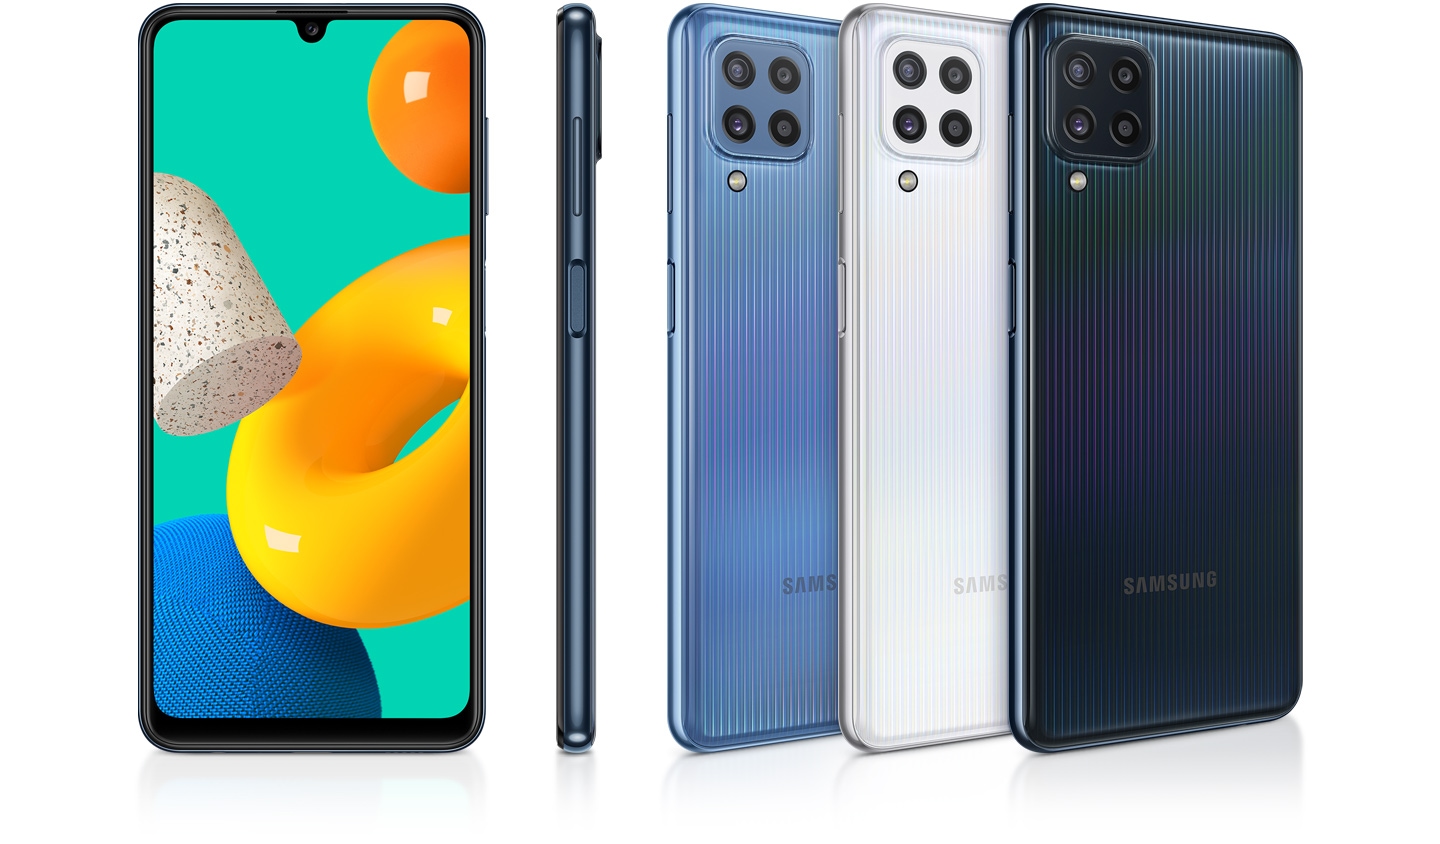 Five devices are displayed to appeal their colors and design. Three reversed ones are in sky blue and black; while one is looking at the front and another showing the right side of device.